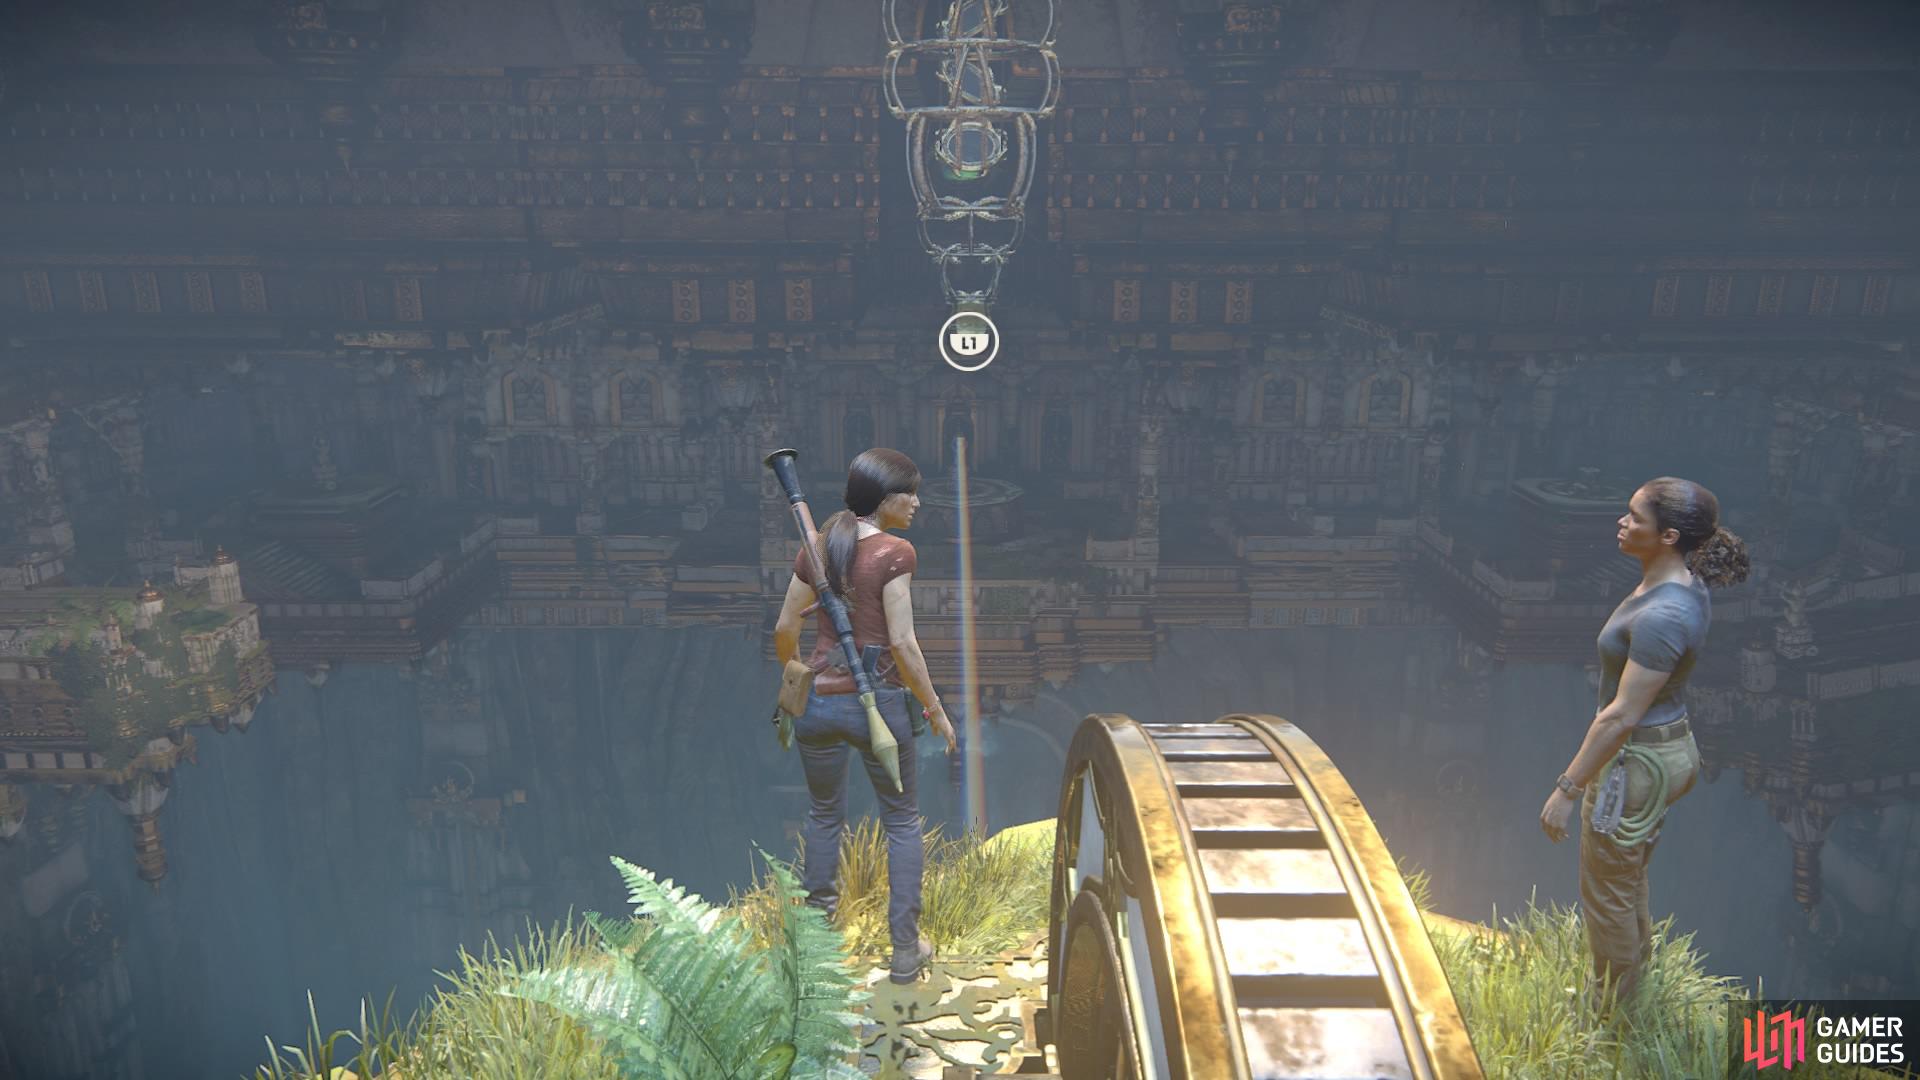 Swing over to the next puzzle from the top of the Shiva statue